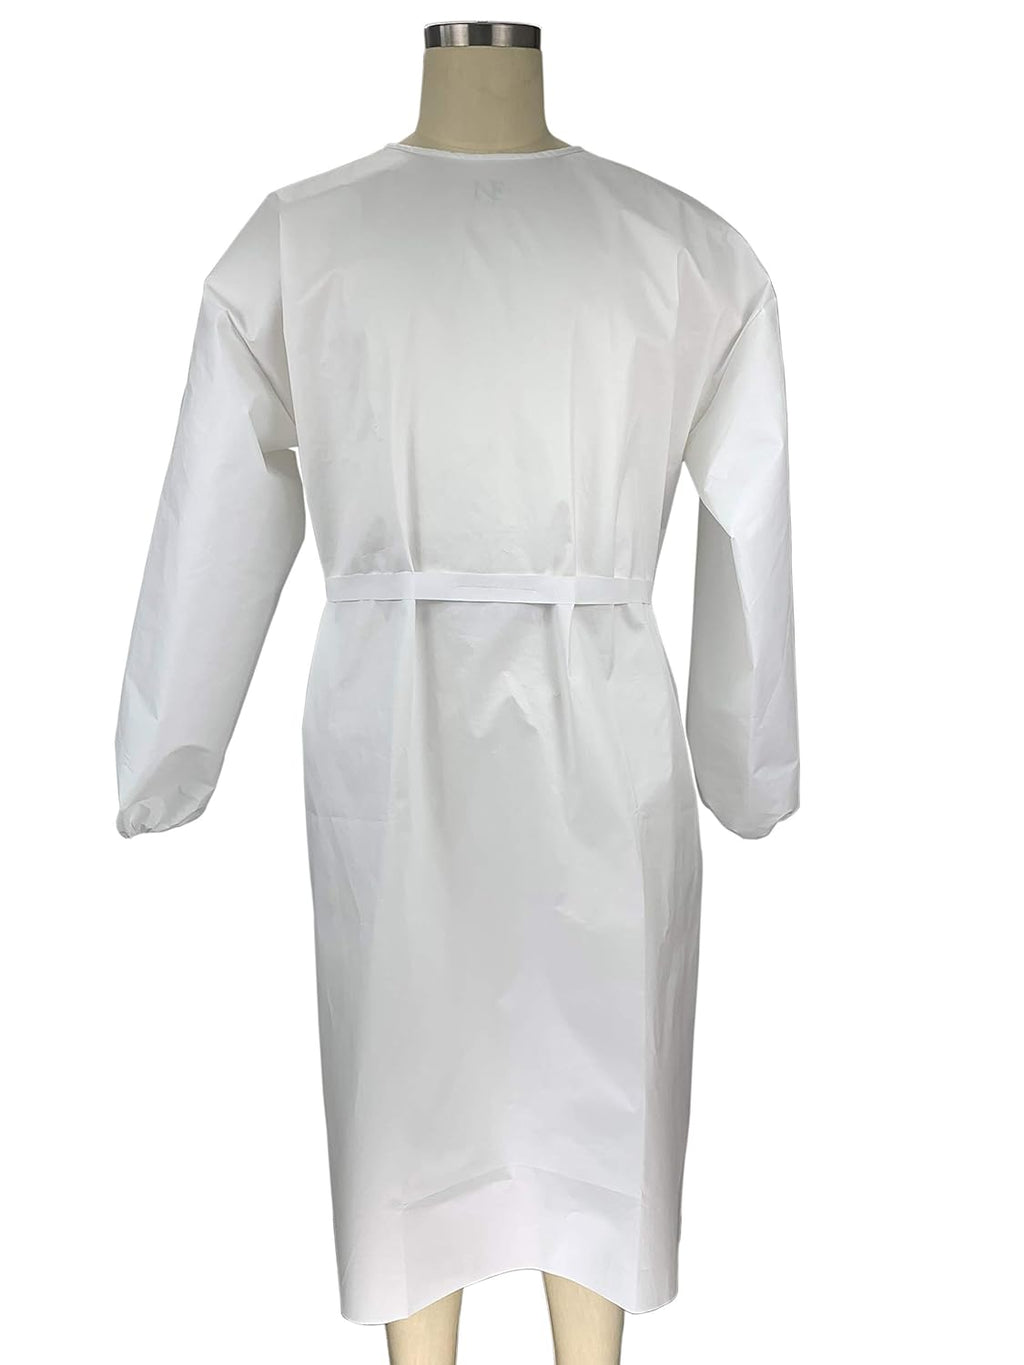 Disposable Isolation Gowns - XL